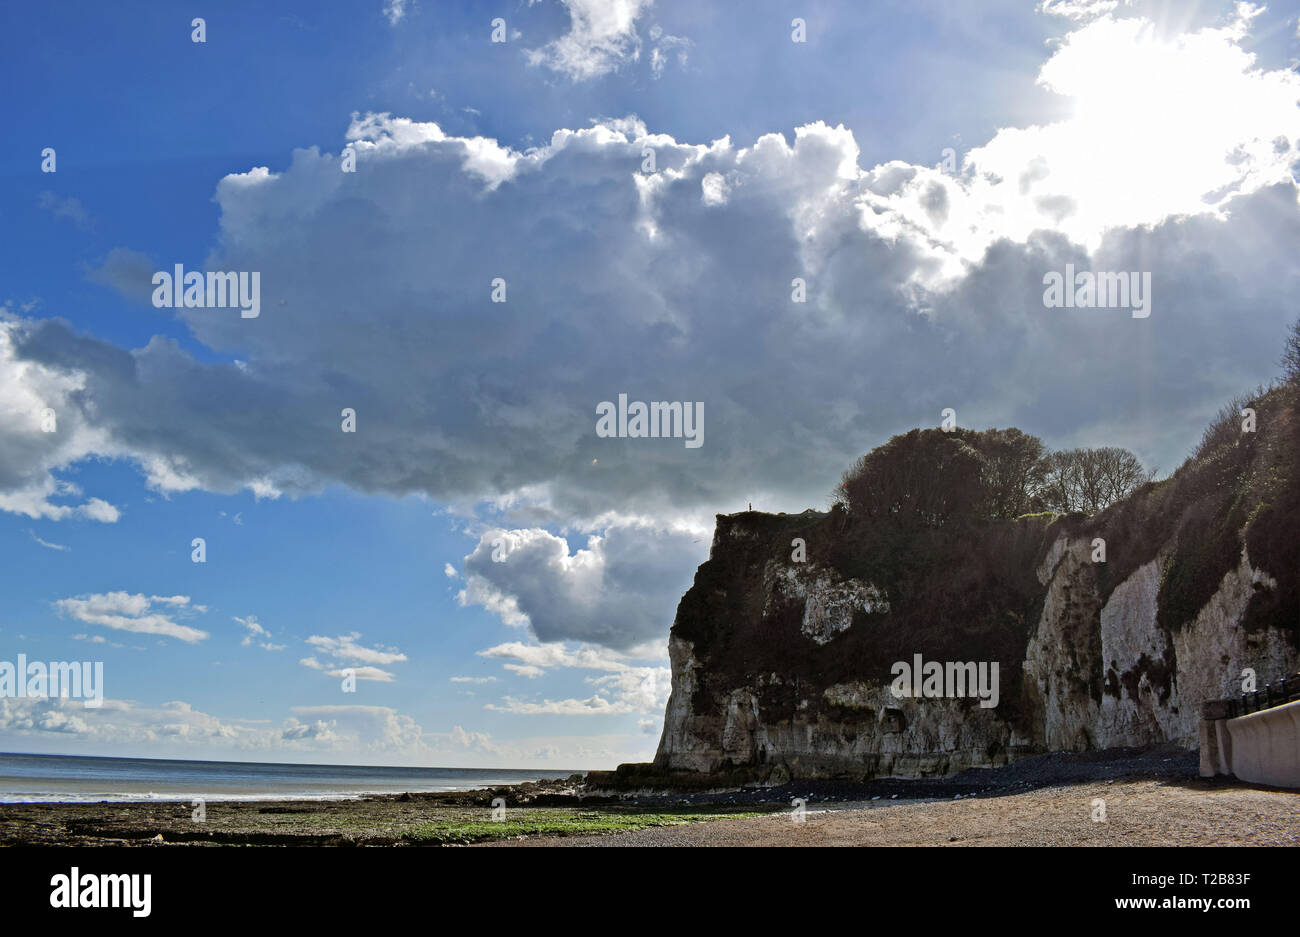 sea scene taken in Saint Margaret's bay with dramatic sky over the cliffs Stock Photo